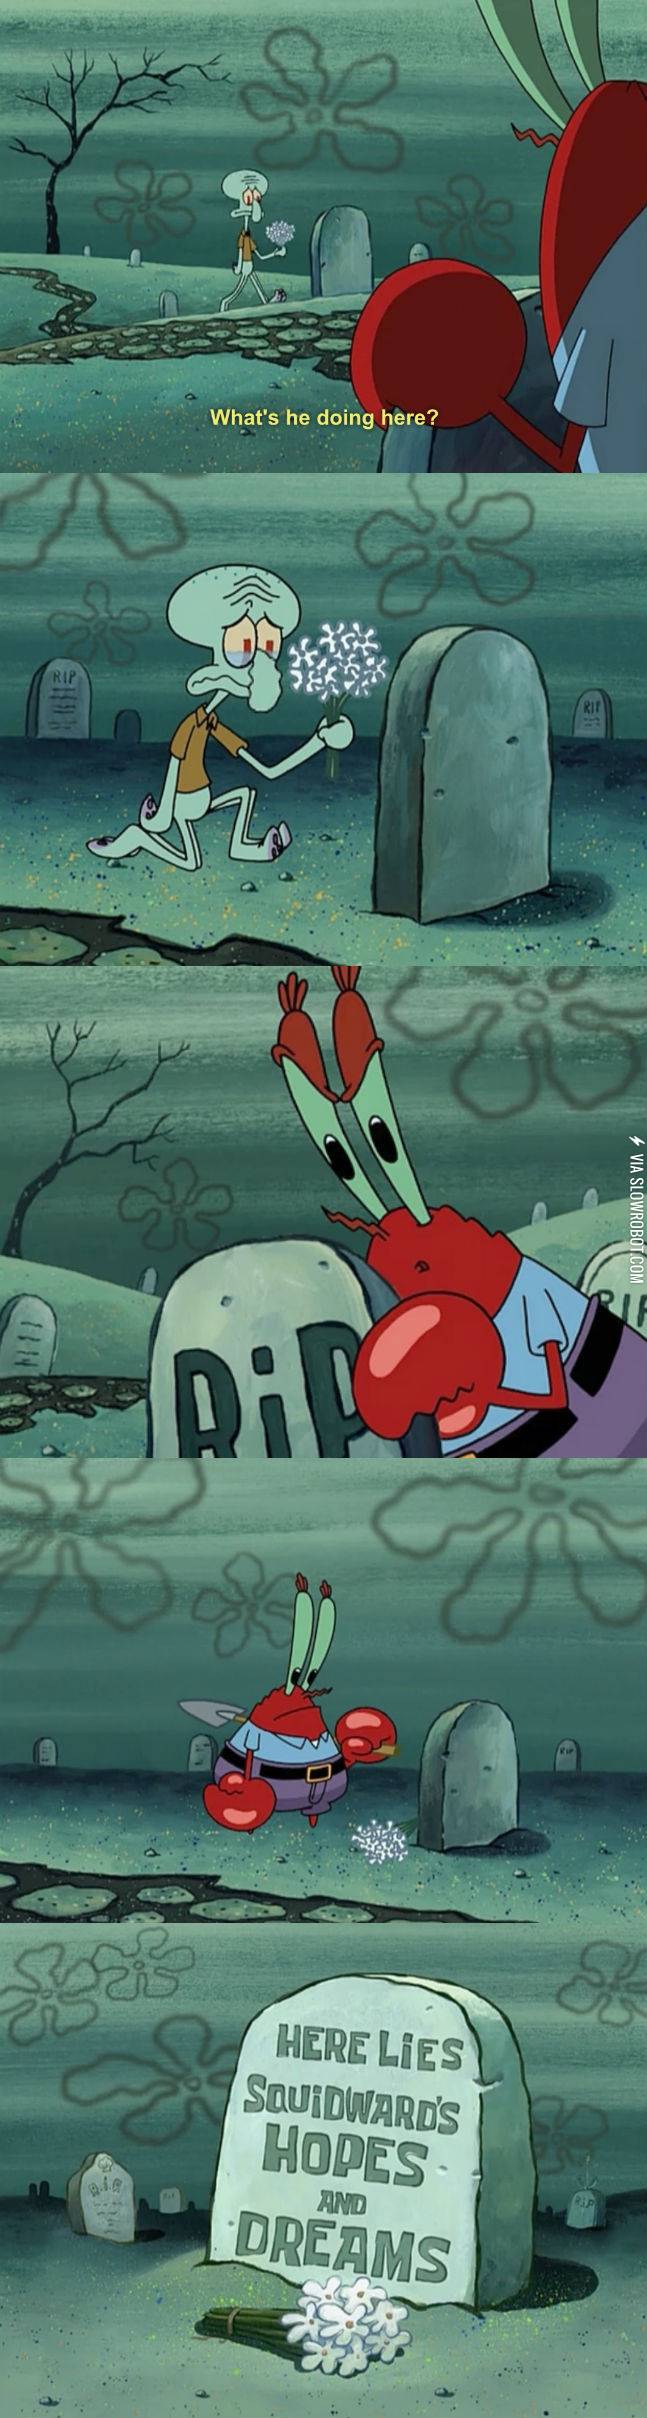 Squidward+mourning+his+hopes+and+dreams.